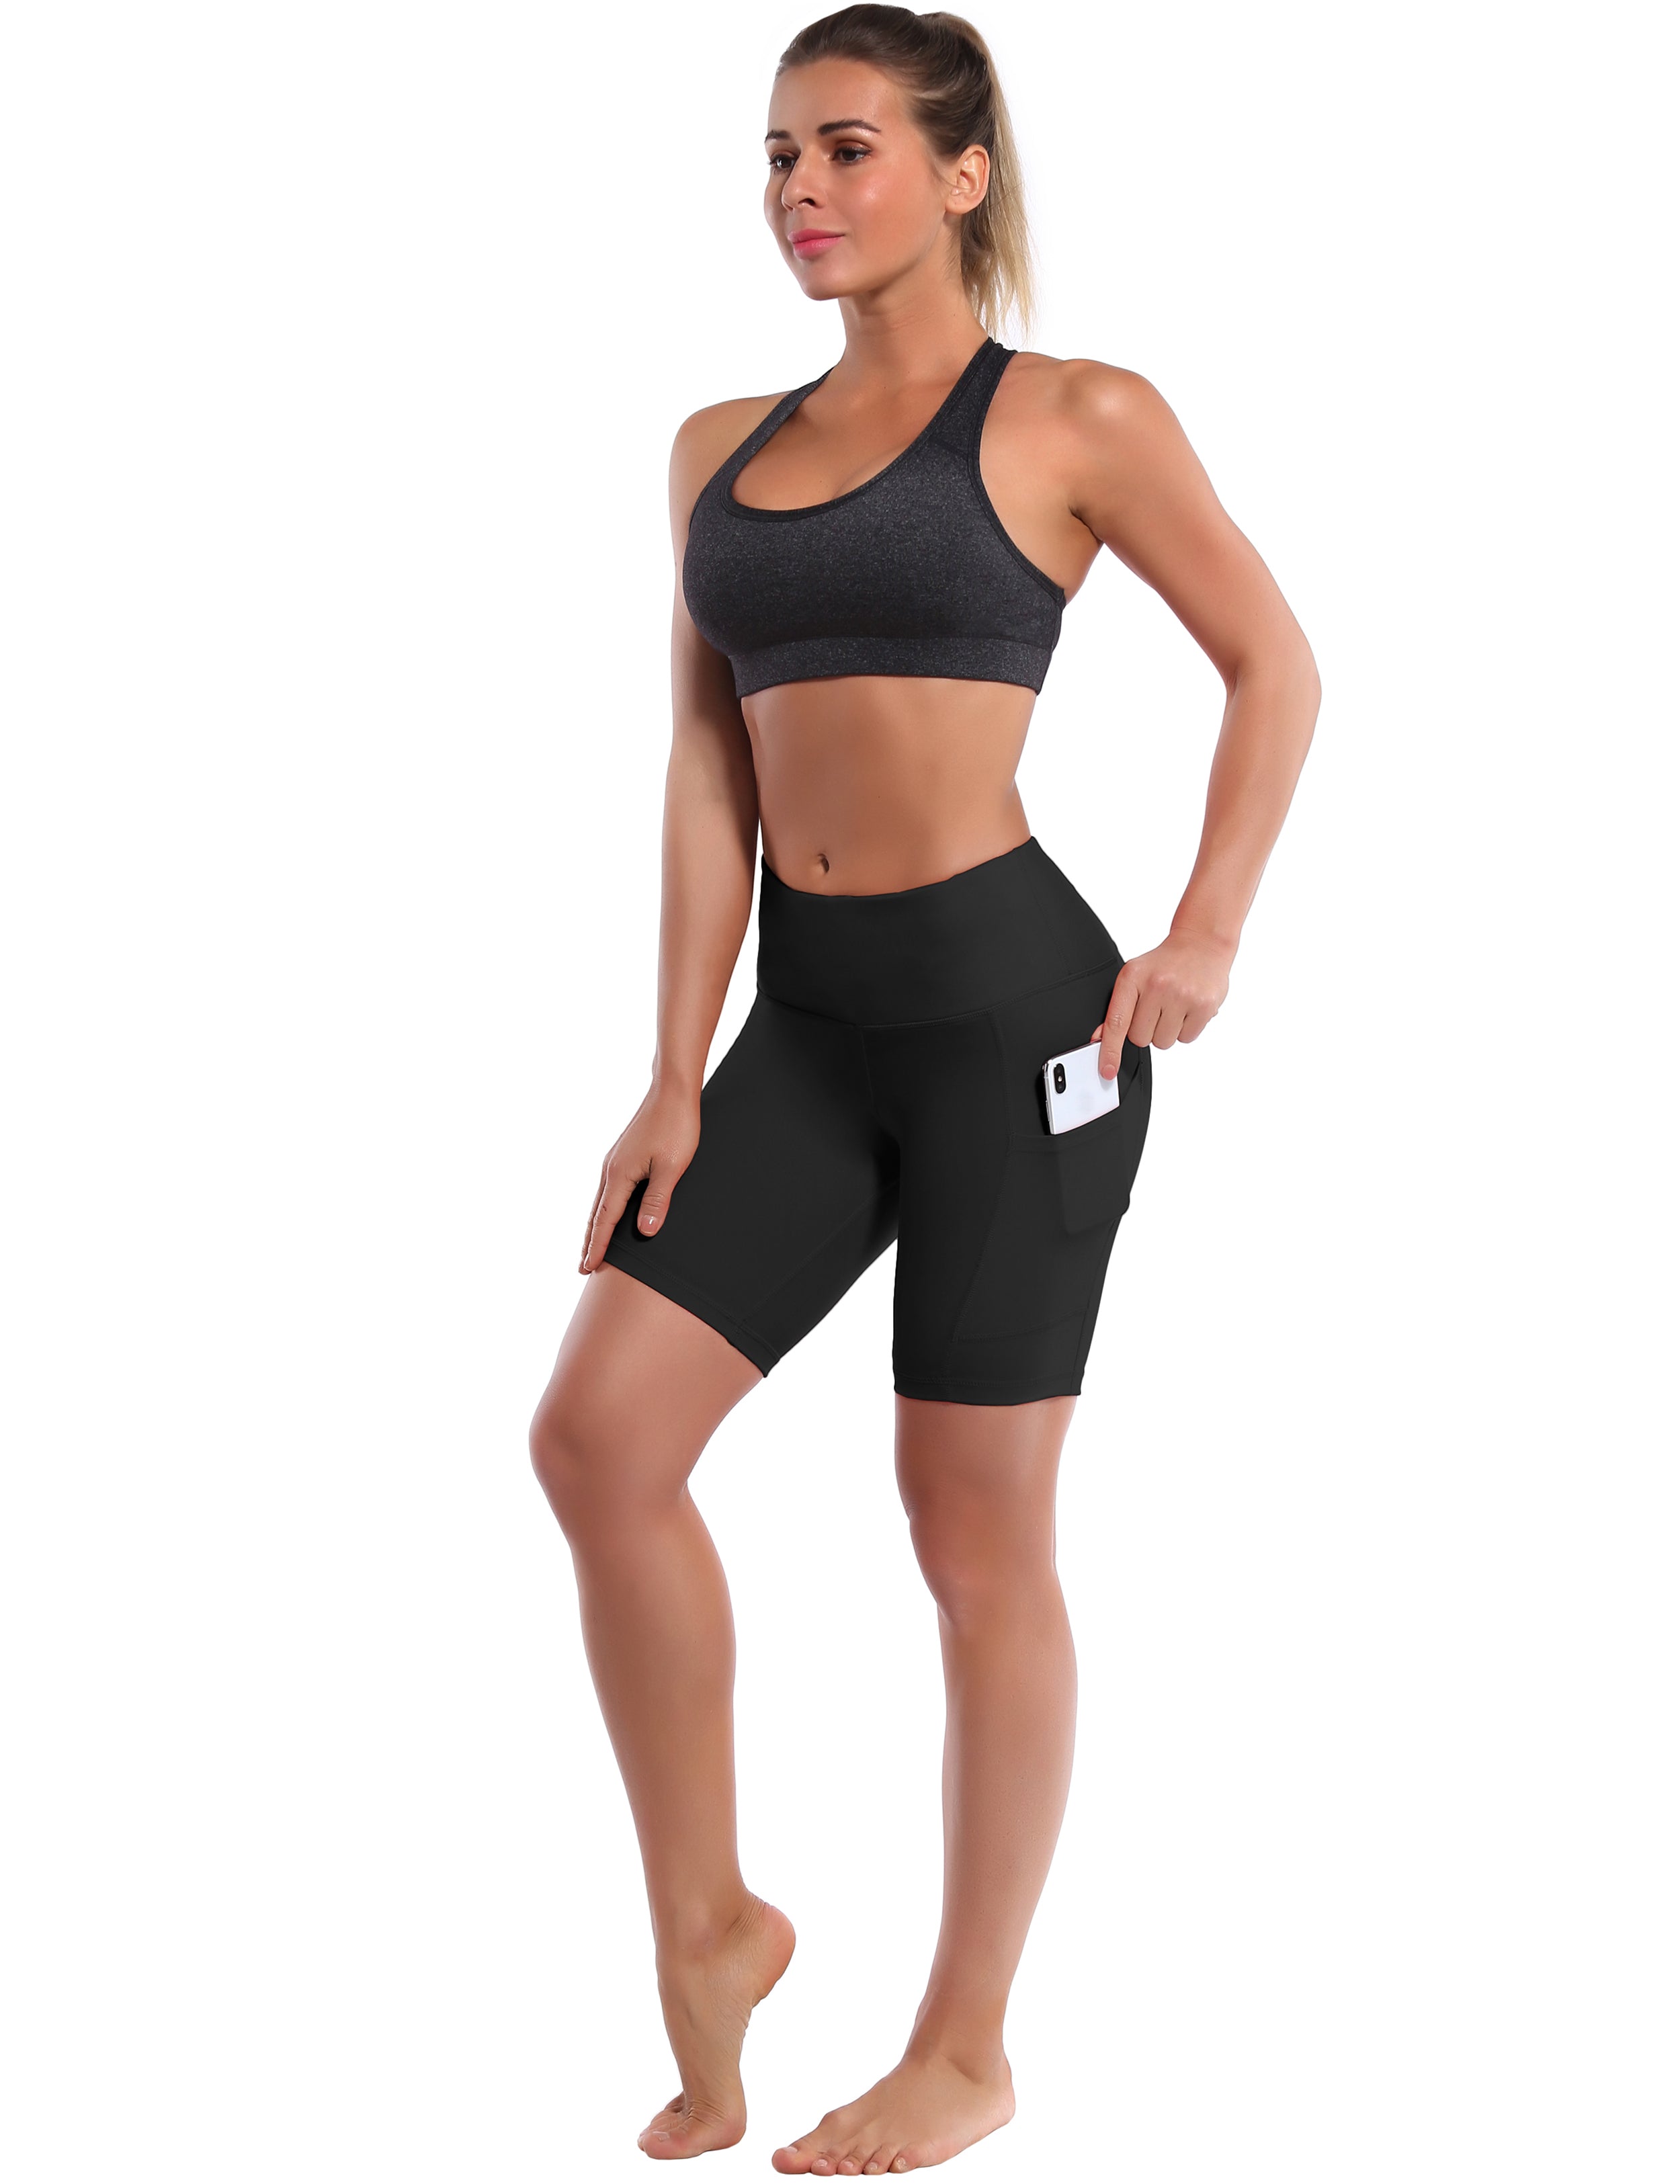 8" Side Pockets Yoga Shorts black Sleek, soft, smooth and totally comfortable: our newest style is here. Softest-ever fabric High elasticity High density 4-way stretch Fabric doesn't attract lint easily No see-through Moisture-wicking Machine wash 75% Nylon, 25% Spandex